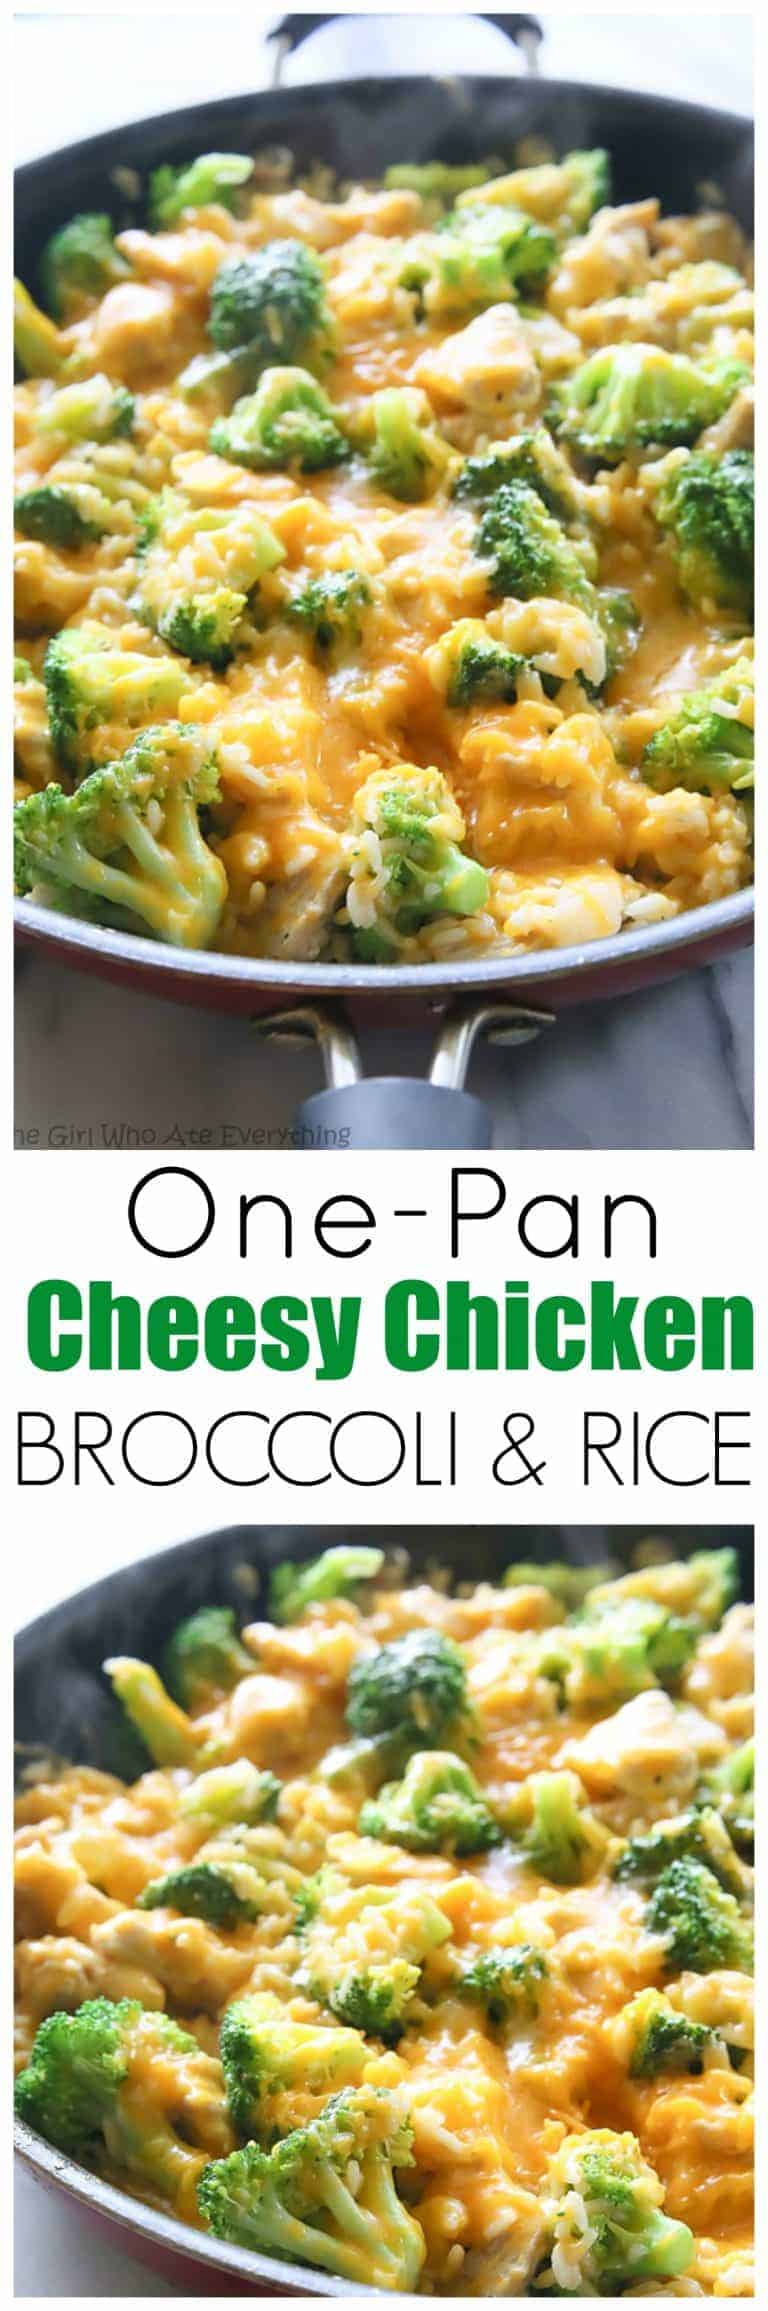 One-Pan Chicken, Broccoli, and Rice (VIDEO) - The Girl Who Ate Everything